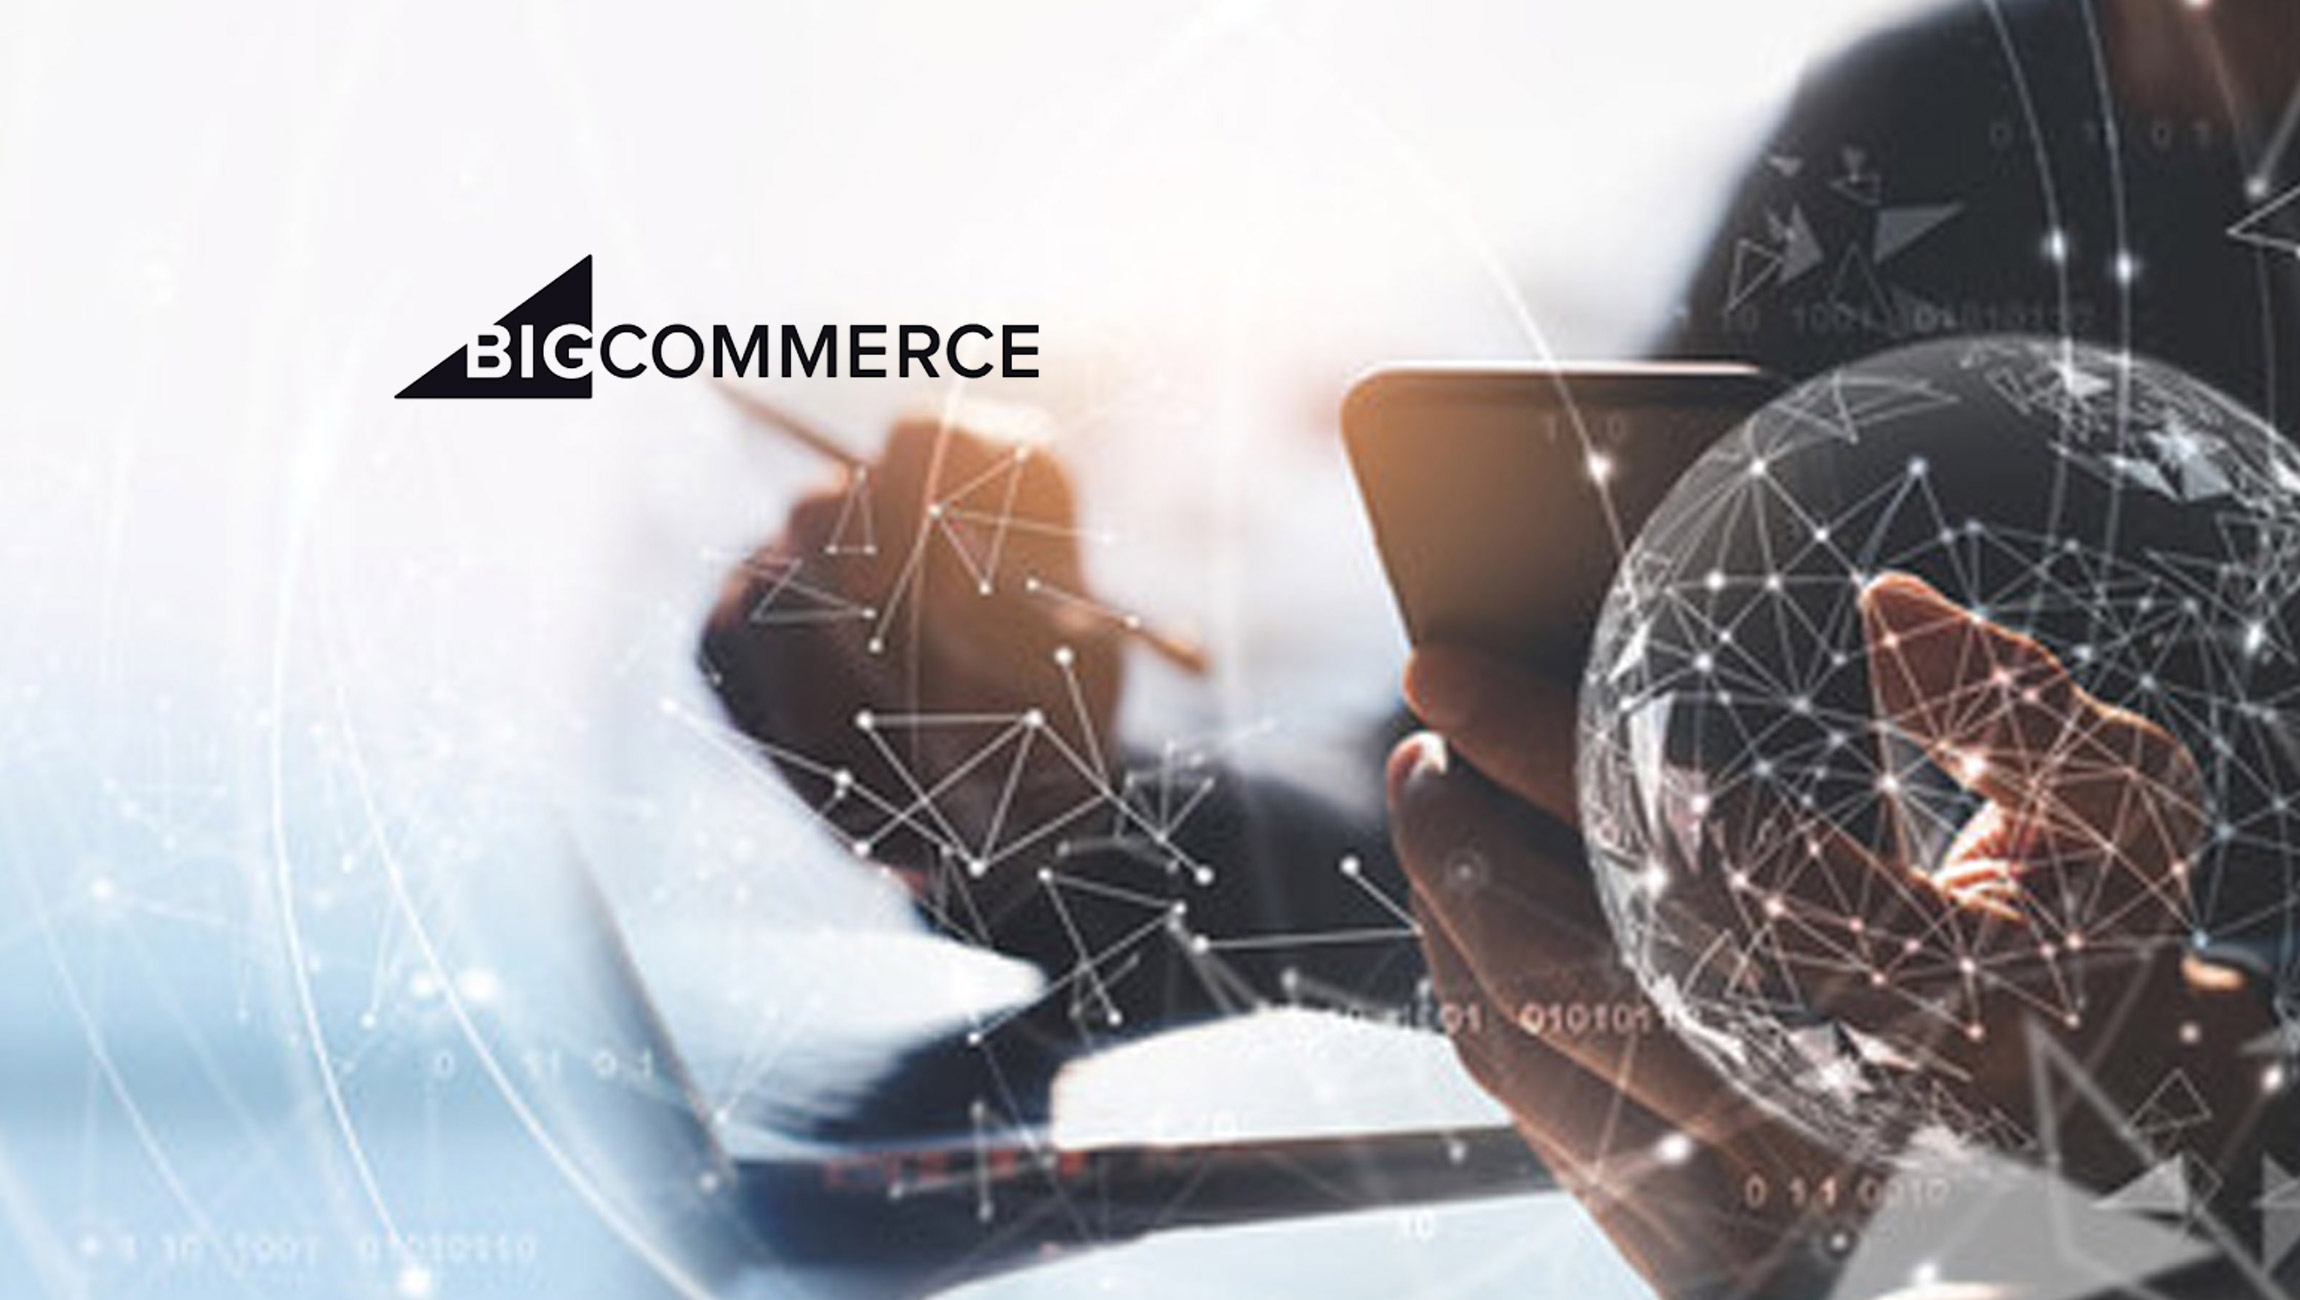 BigCommerce Expands Multi-Storefront (MSF) For Merchants of All Sizes to Help Accelerate Time-to-Market and Global Growth